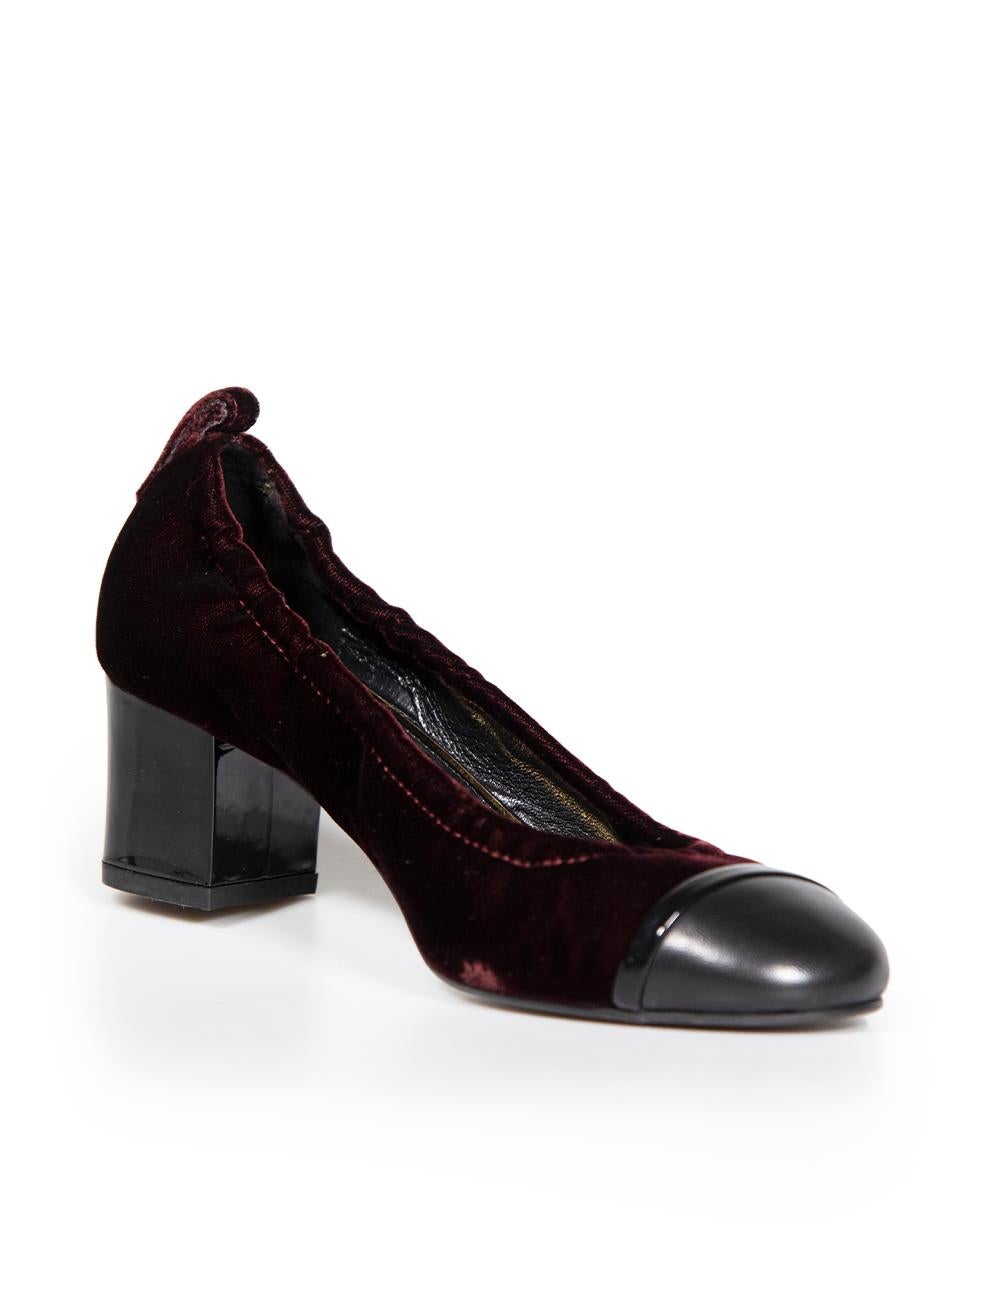 CONDITION is Very good. Hardly any visible wear to shoes is evident on this used Lanvin designer resale item.
 
 
 
 Details
 
 
 Burgundy
 
 Velvet
 
 Pumps
 
 Mid heel
 
 Round toe
 
 Black leather cap toe
 
 
 
 
 
 Made in Portugal
 
 
 
